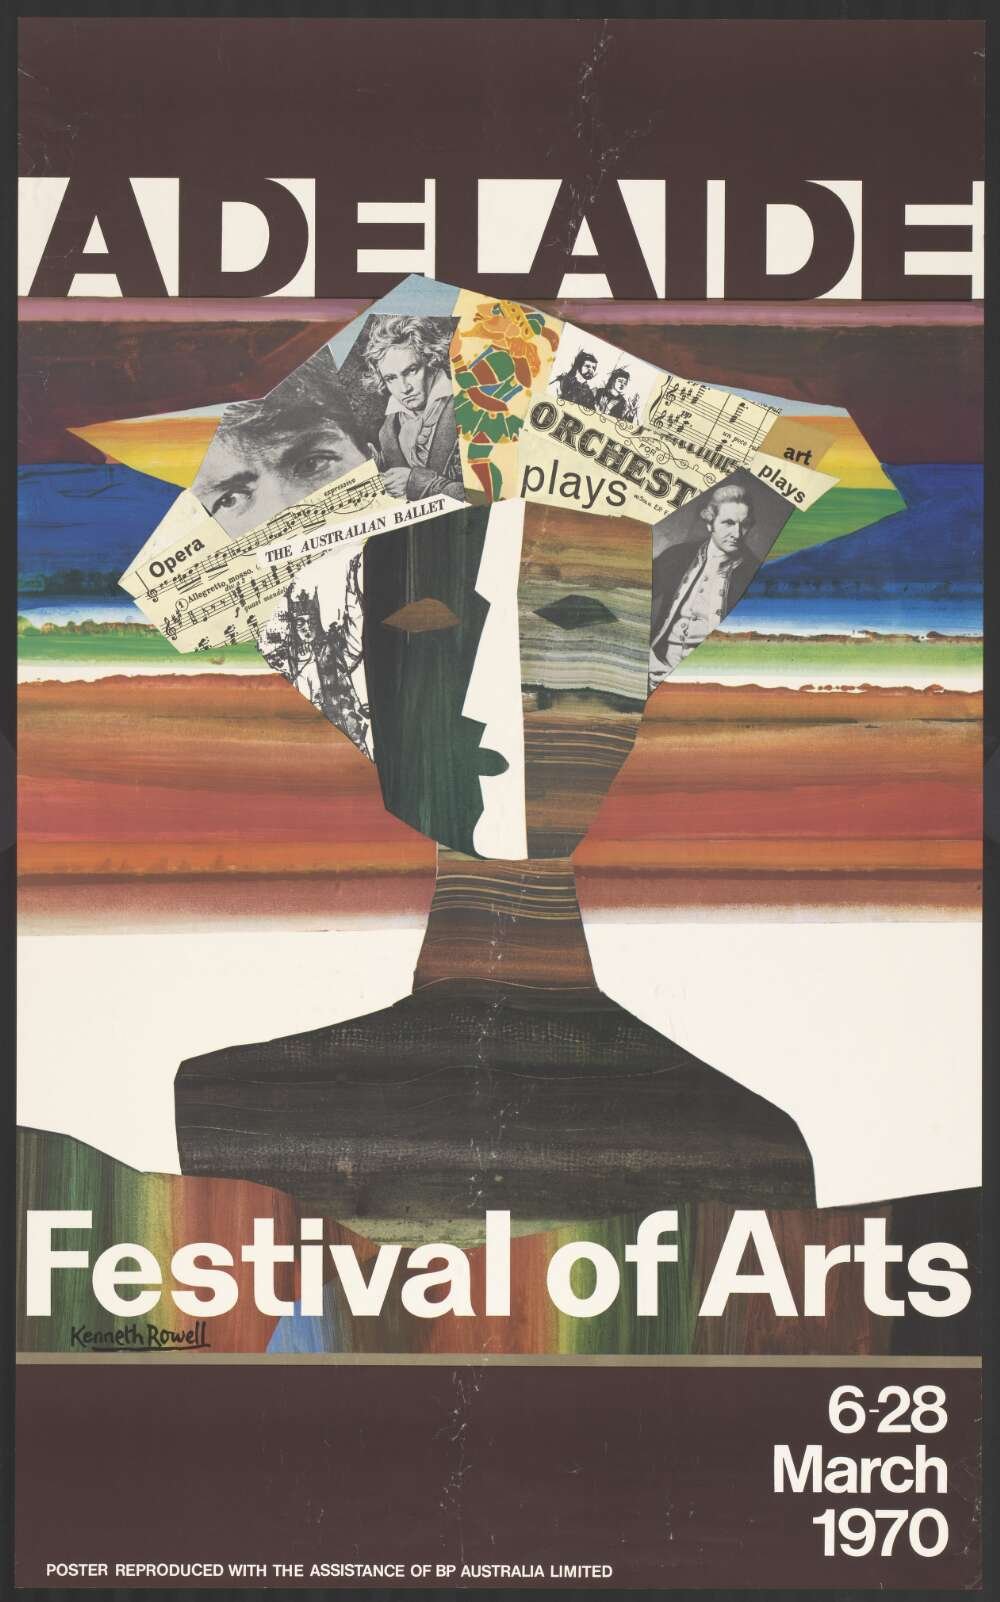 Colourful collage poster advertising the 1970 Adelaide Festival; depicts a person made up of newspaper clippings